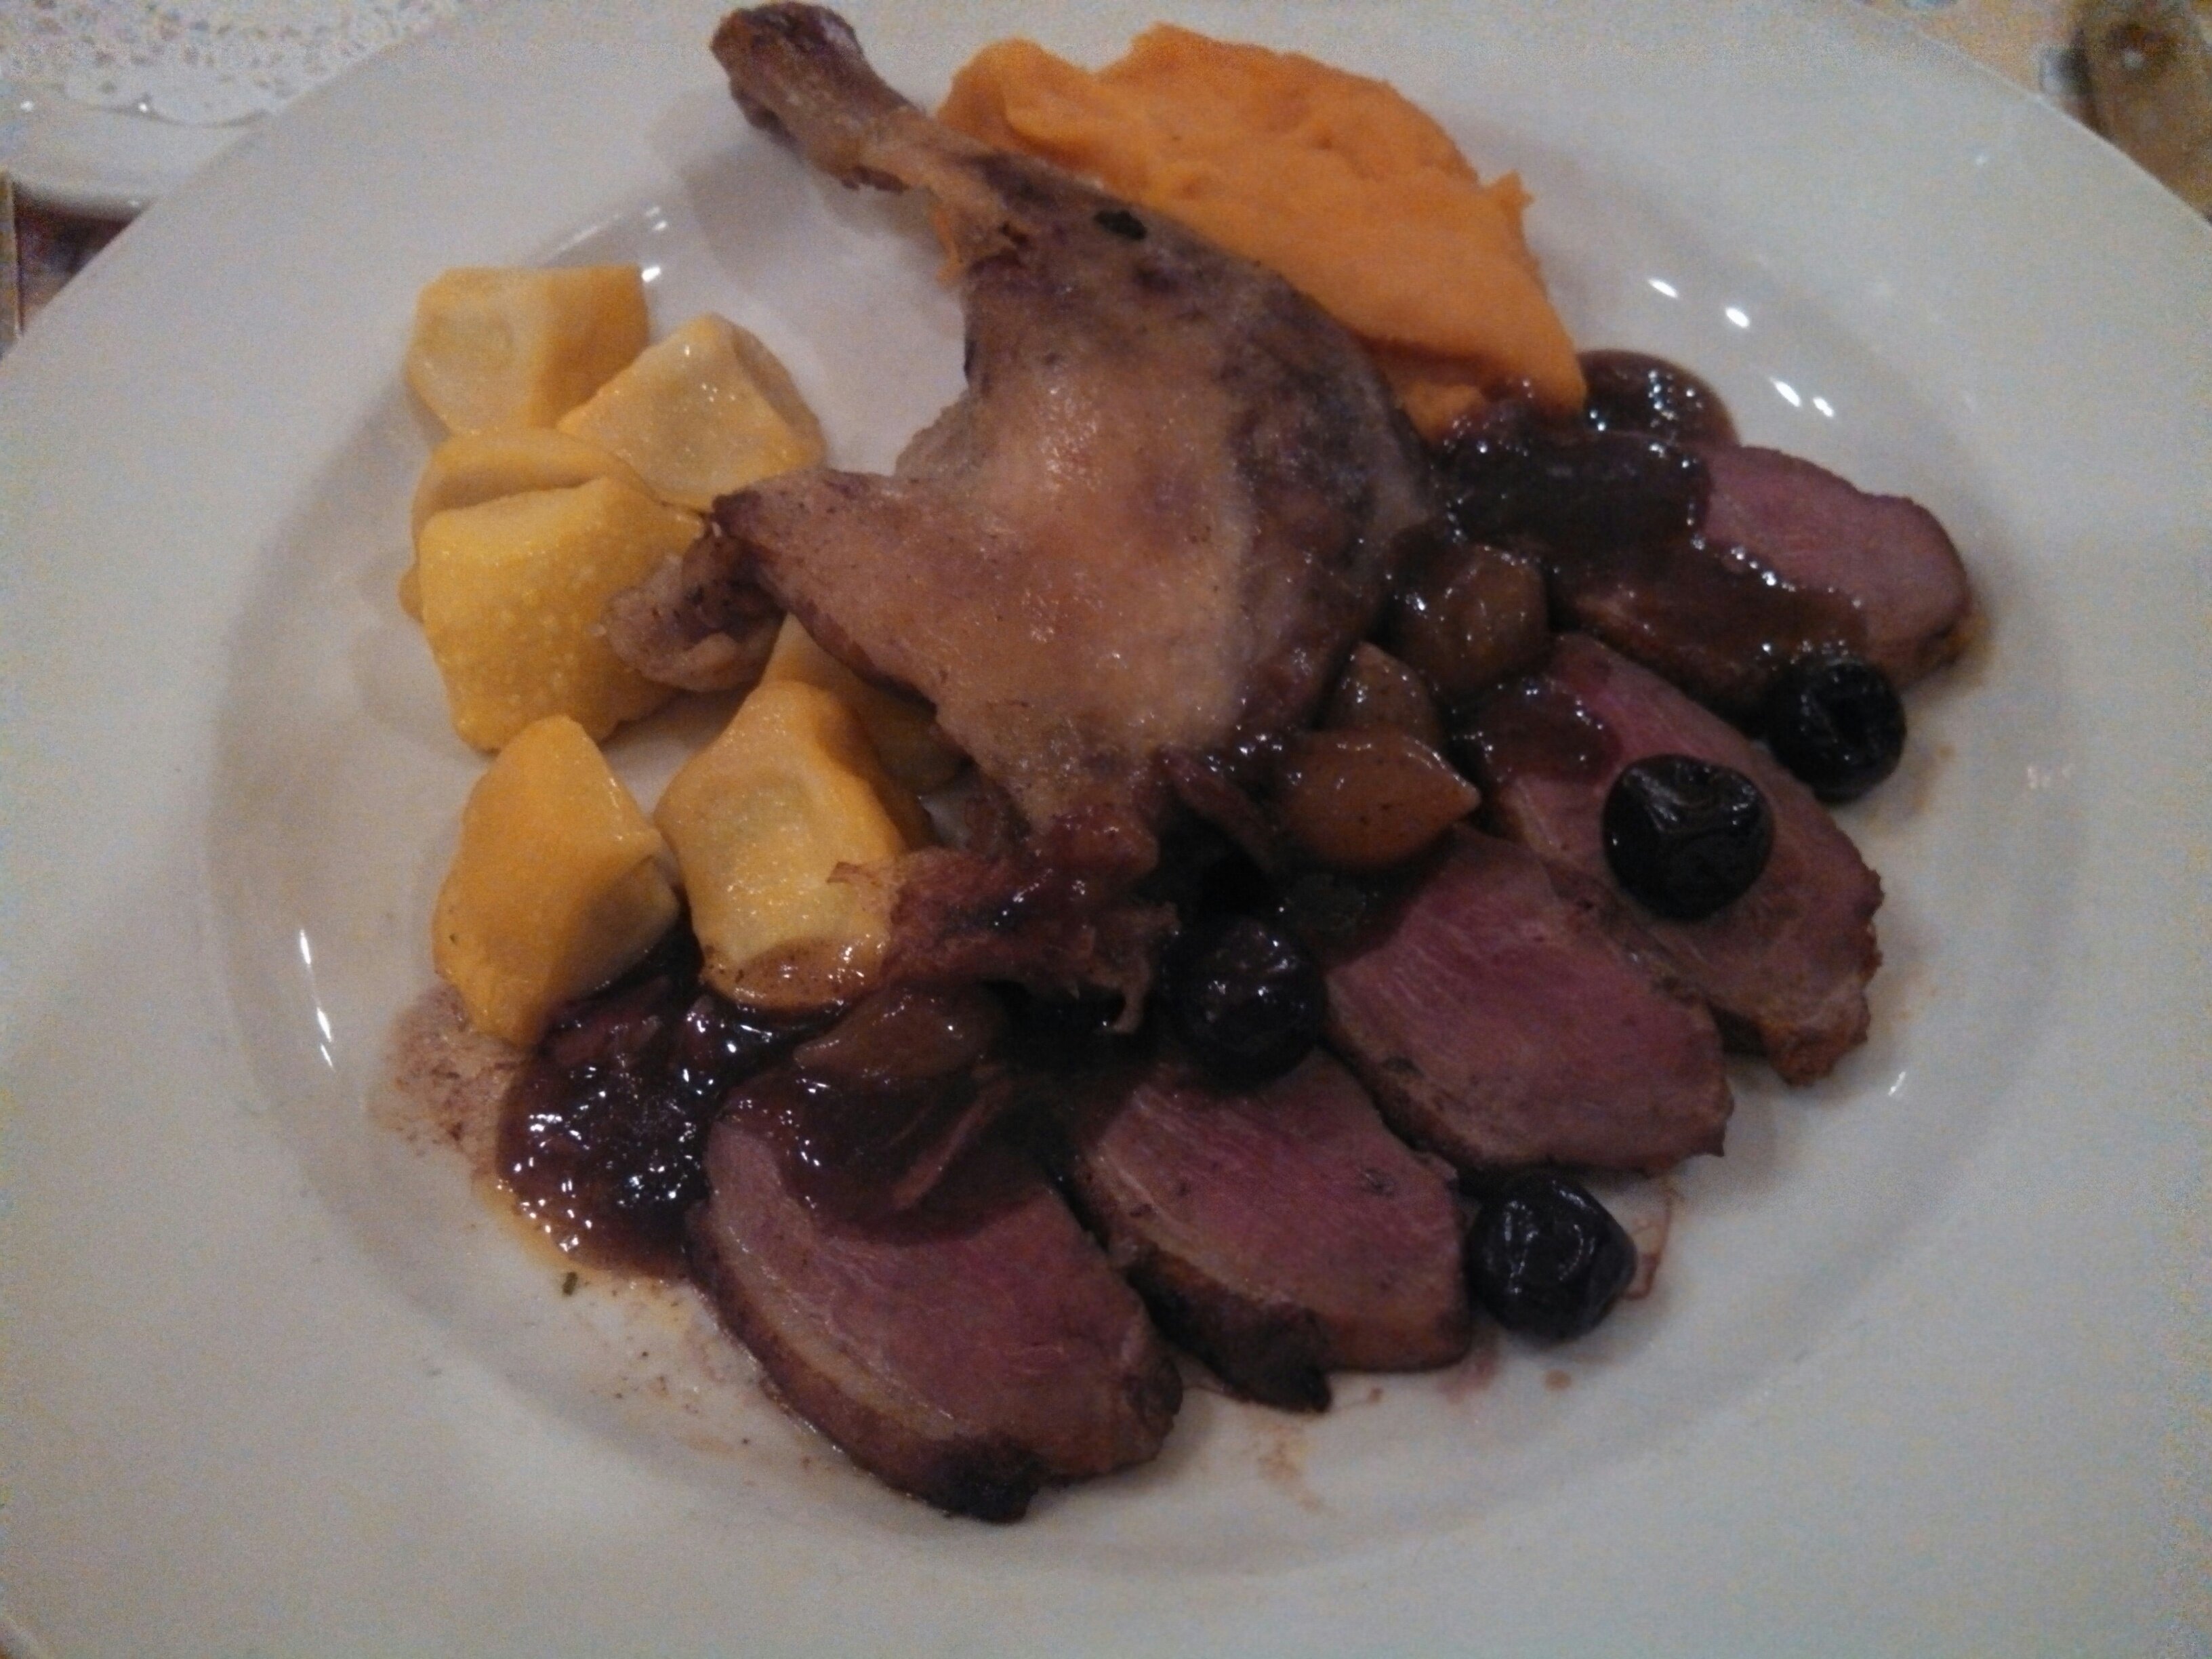 Gluten-free duck breast and leg confit at Chefs de France - Epcot